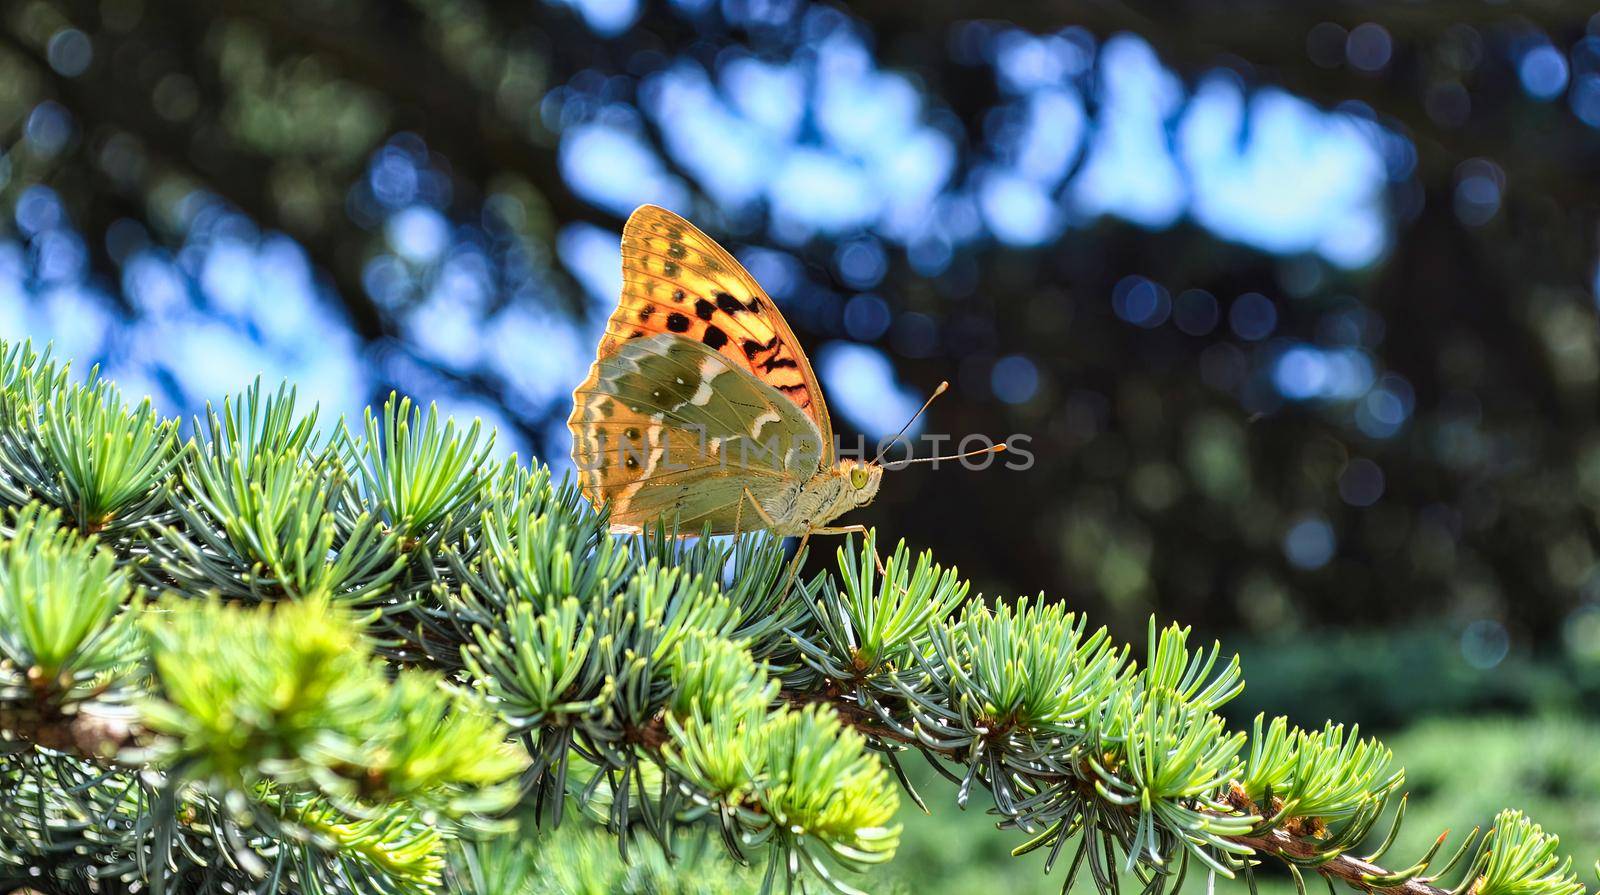 Butterfly standing on a lodge pole pine branch, horizontal by igor010